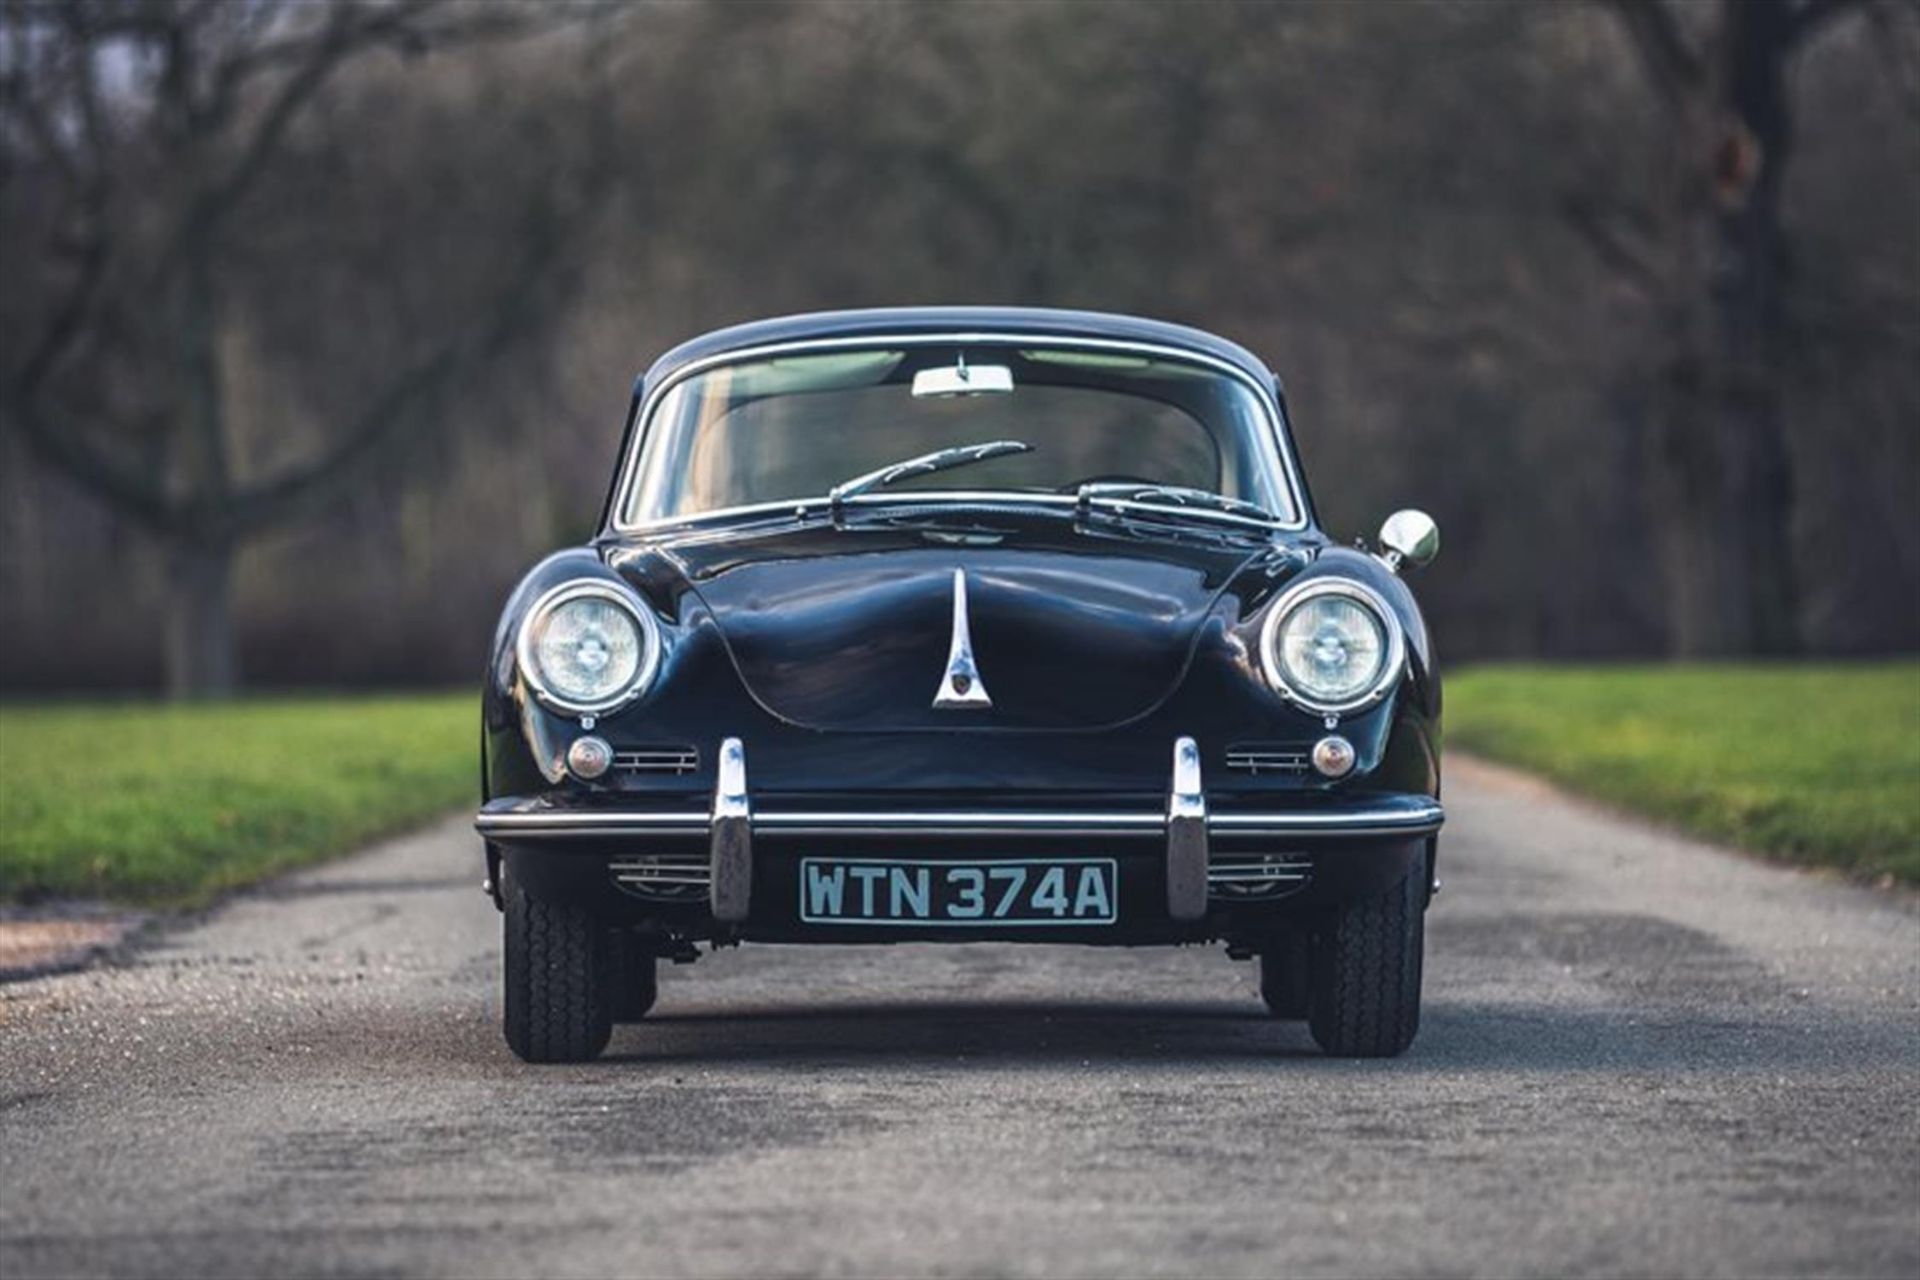 1963 Porsche 356 B T6 Coupe to ‘S’ Specification - Image 6 of 10